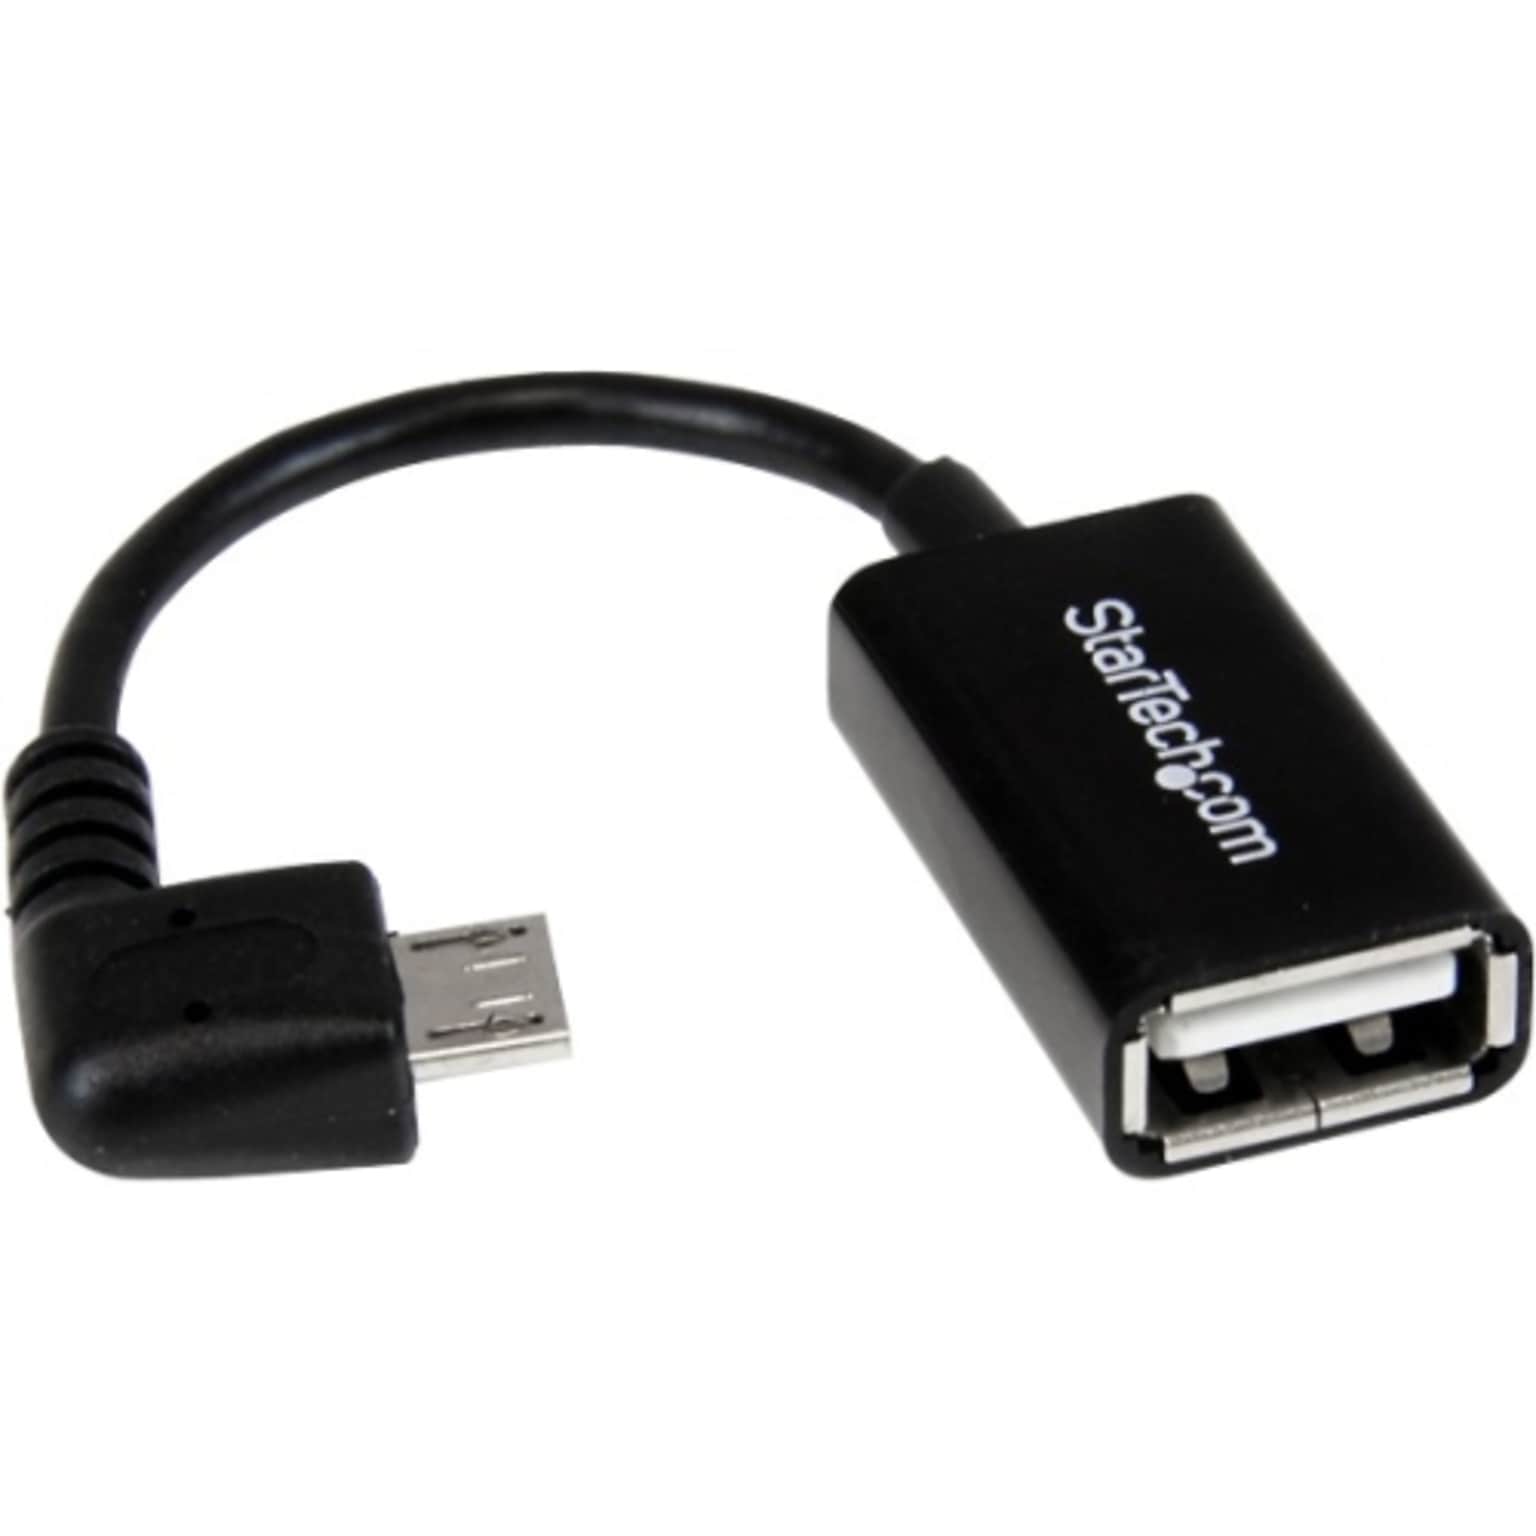 Startech 5 Micro USB To USB OTG Male/Female Host Adapter Cable